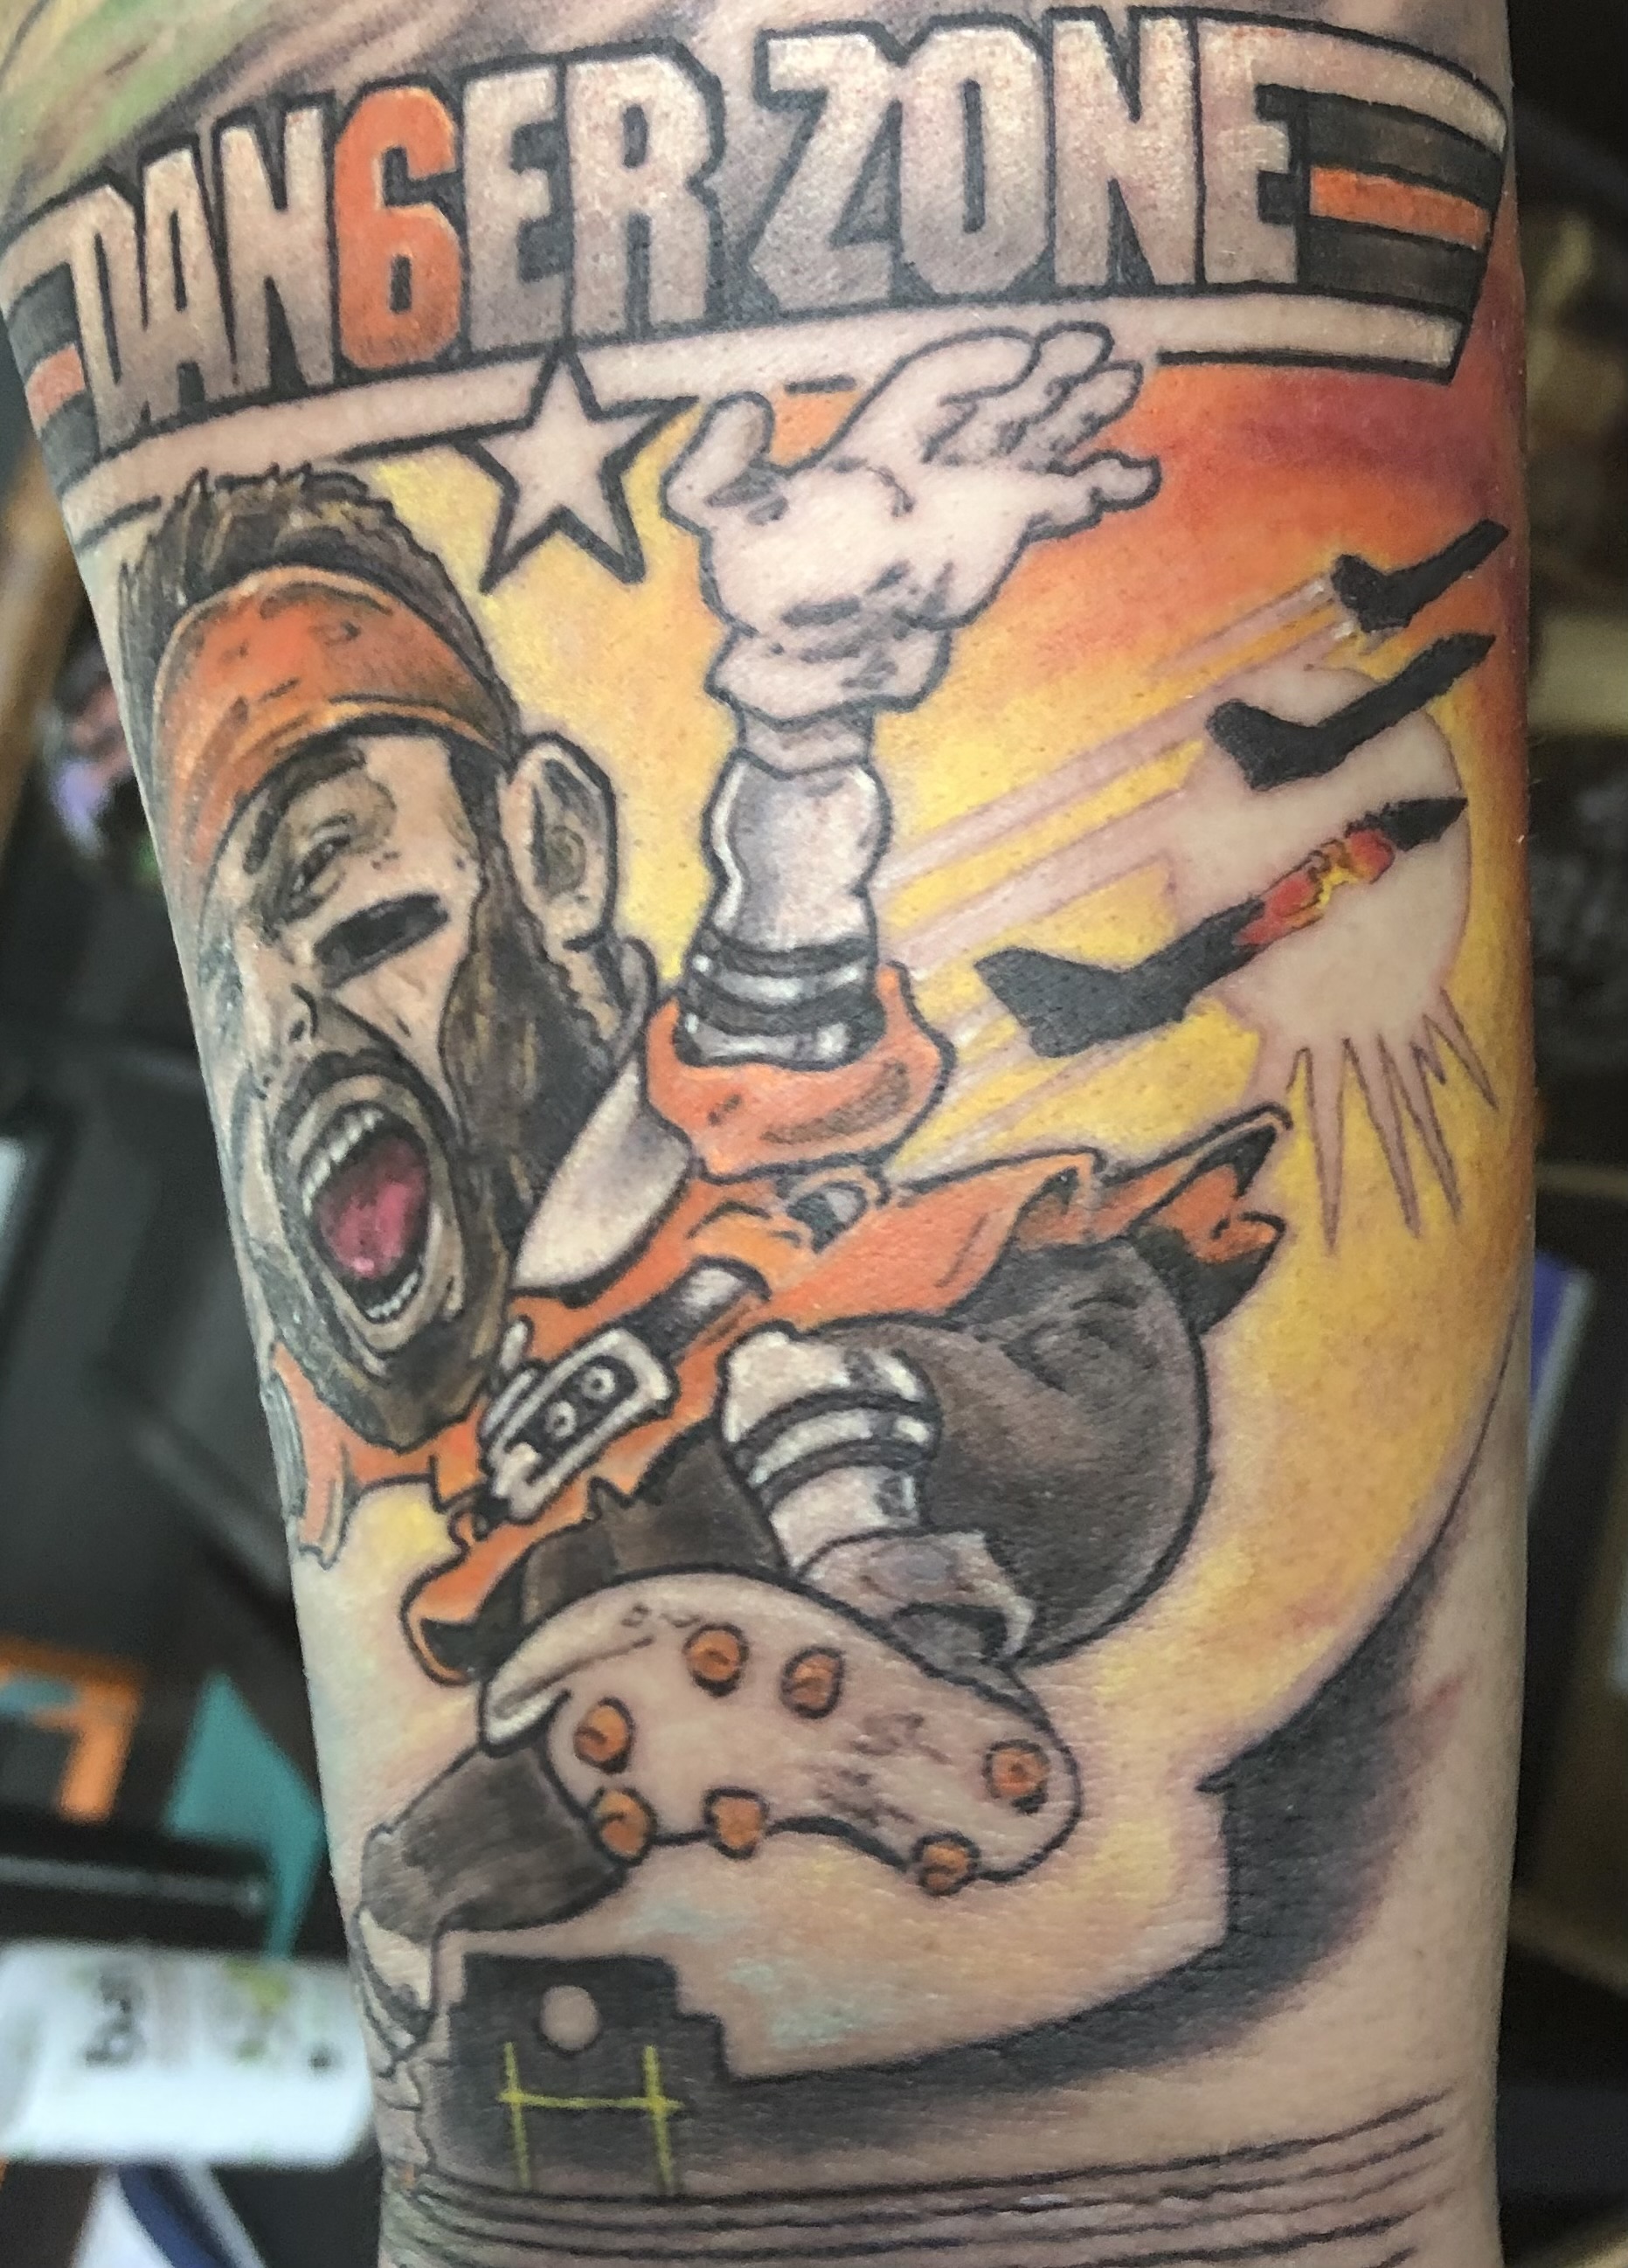 Baker Mayfield tattoos represent more than just the quarterback for Browns  fans  clevelandcom